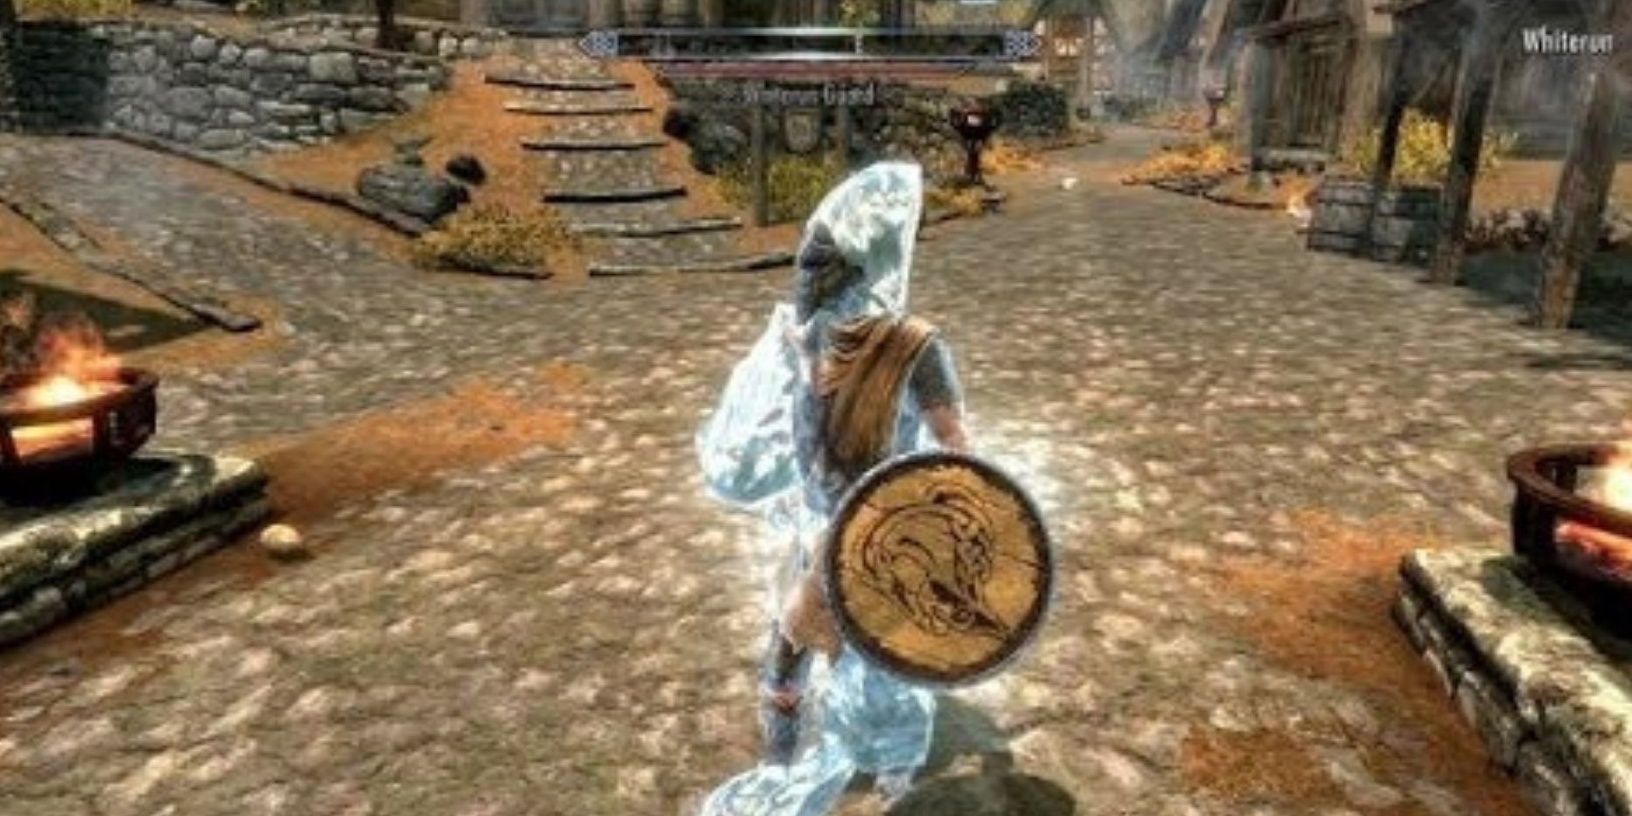 A guard from Skyrim encased in ice